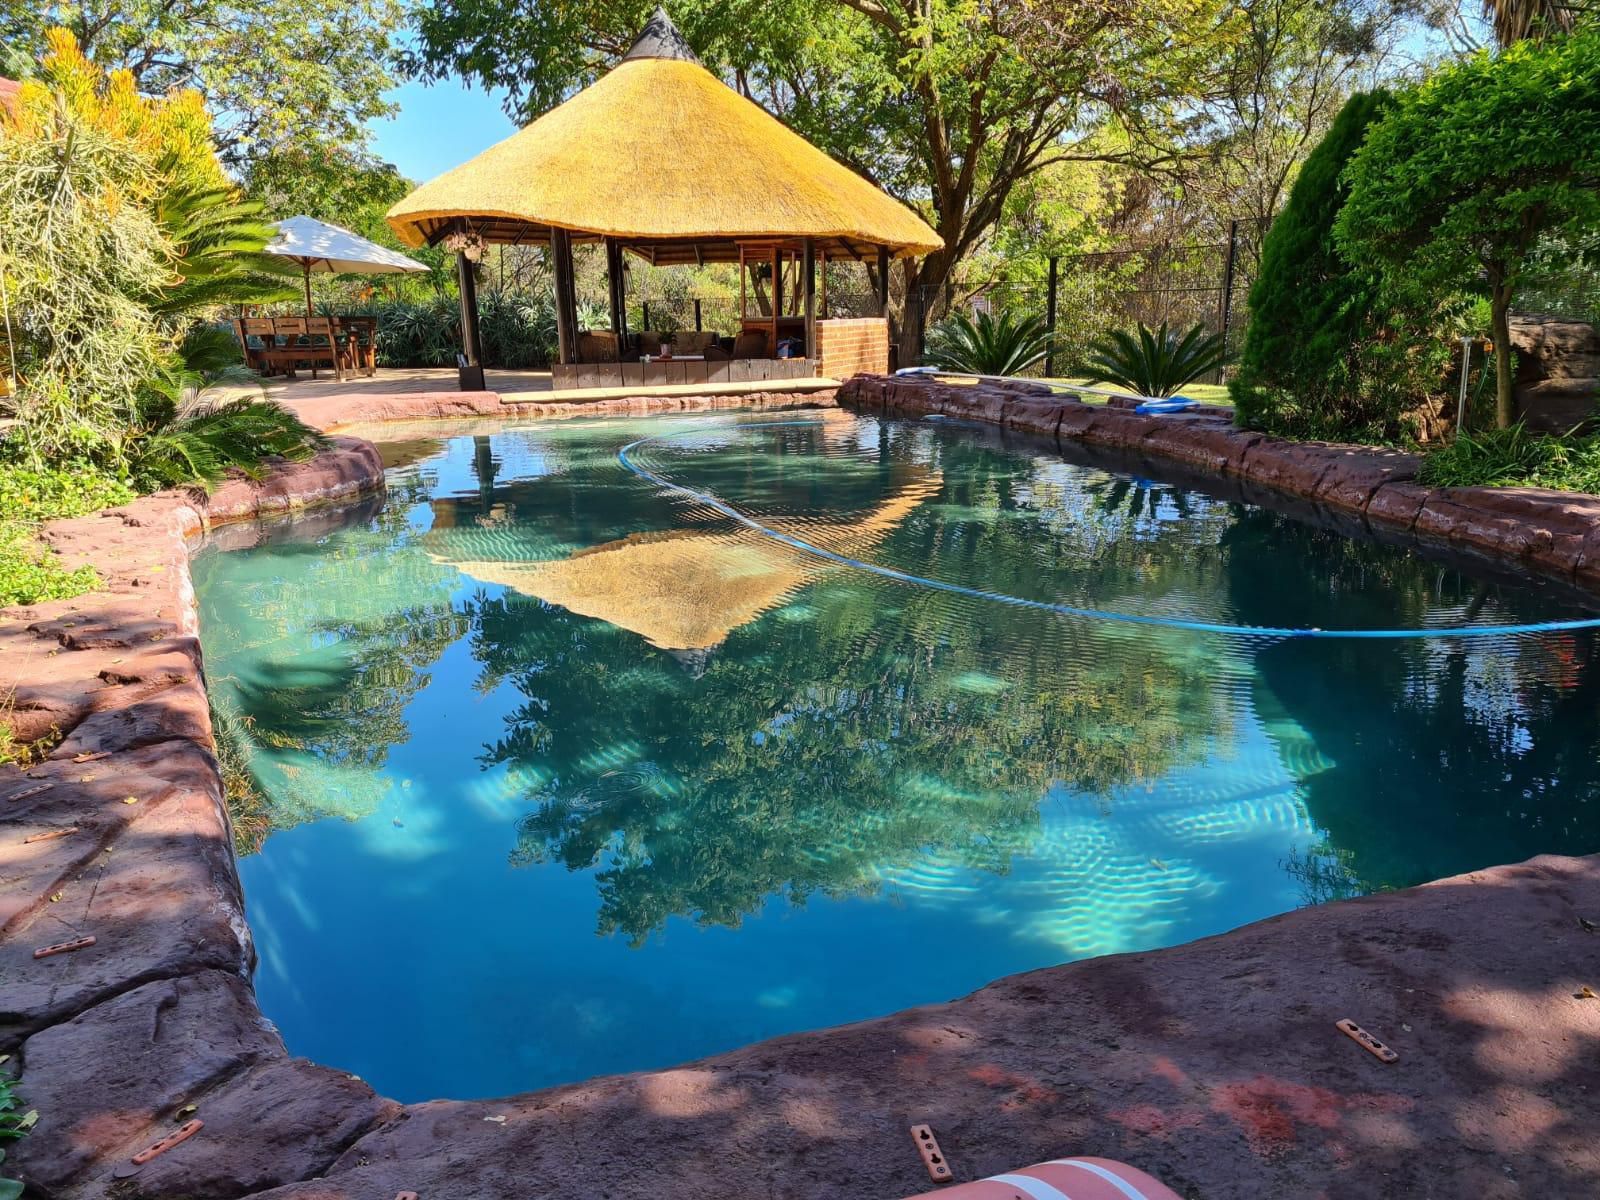 Duke S Place Nature Guesthouse Halfway Gardens Johannesburg Gauteng South Africa Complementary Colors, Swimming Pool